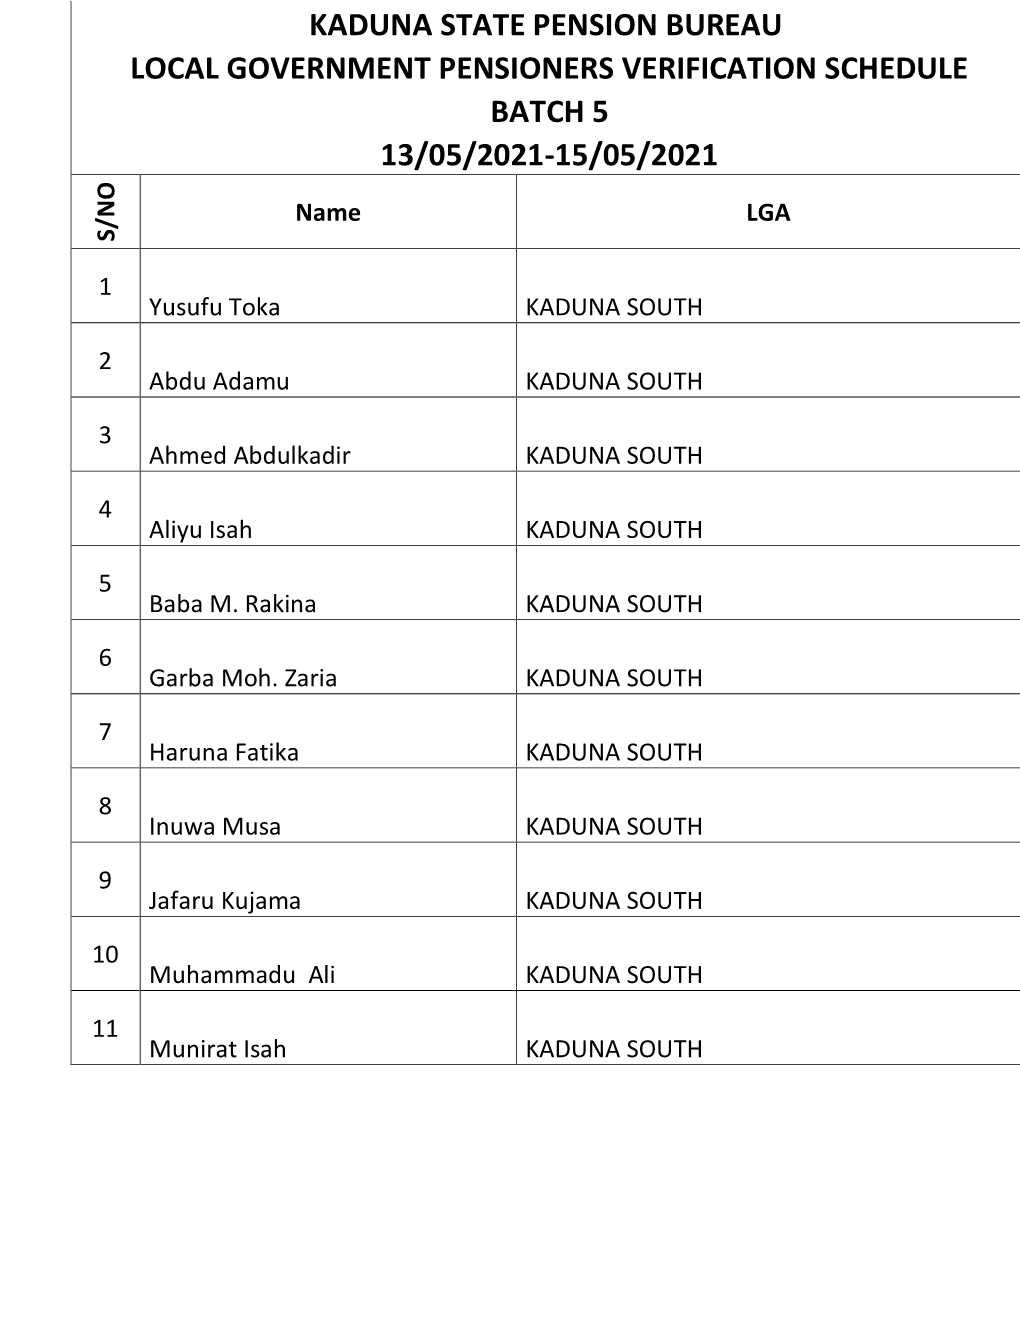 Local Government Pensioners Verification Schedule Batch 5